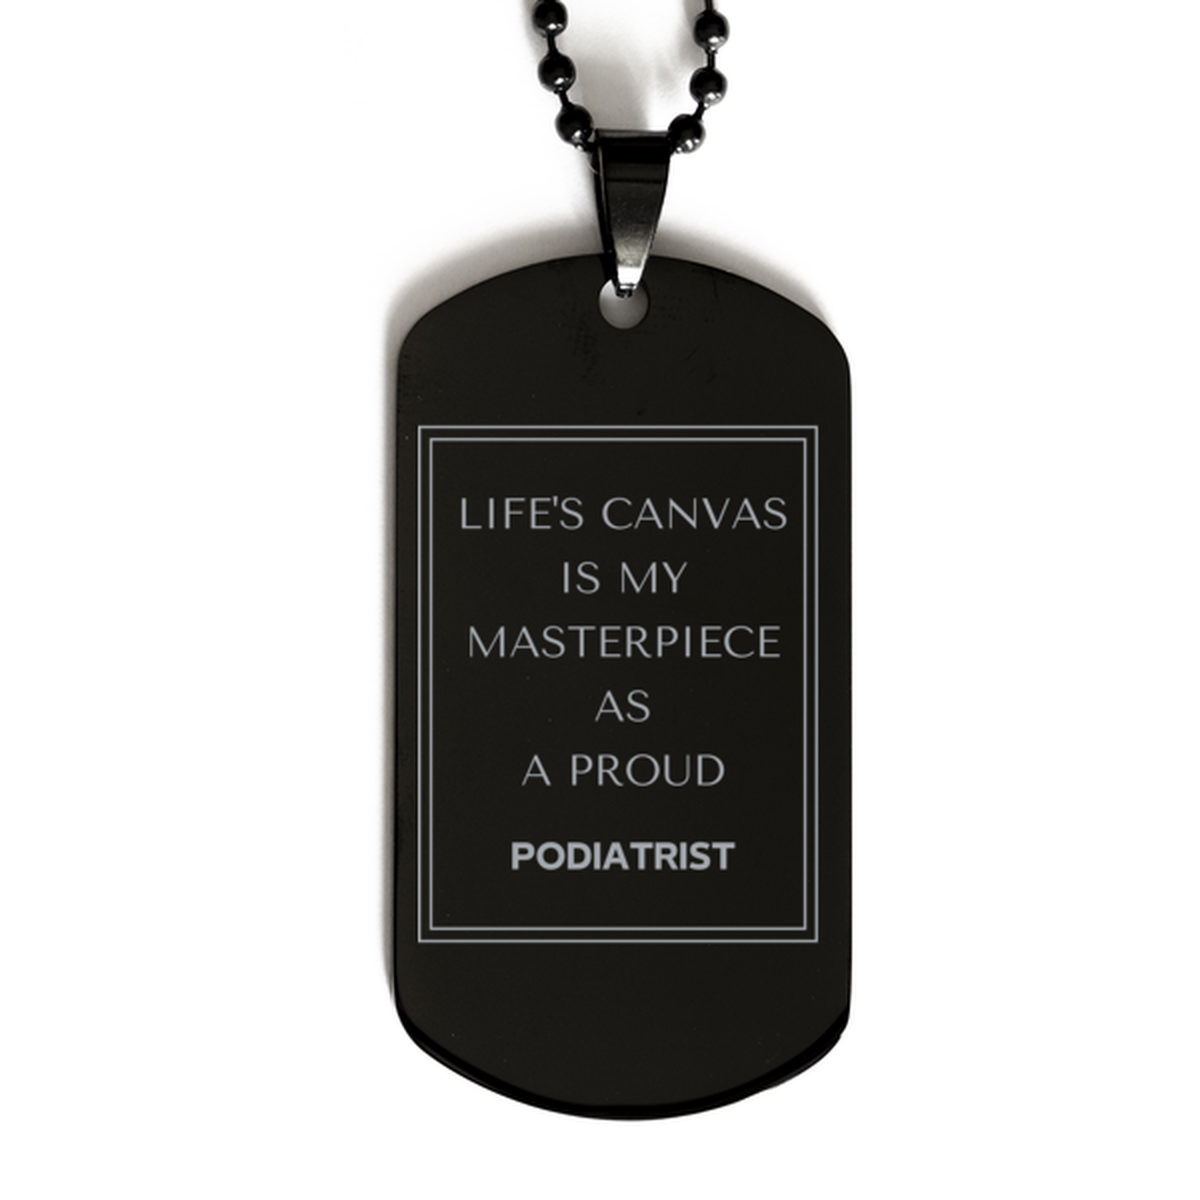 Proud Podiatrist Gifts, Life's canvas is my masterpiece, Epic Birthday Christmas Unique Black Dog Tag For Podiatrist, Coworkers, Men, Women, Friends